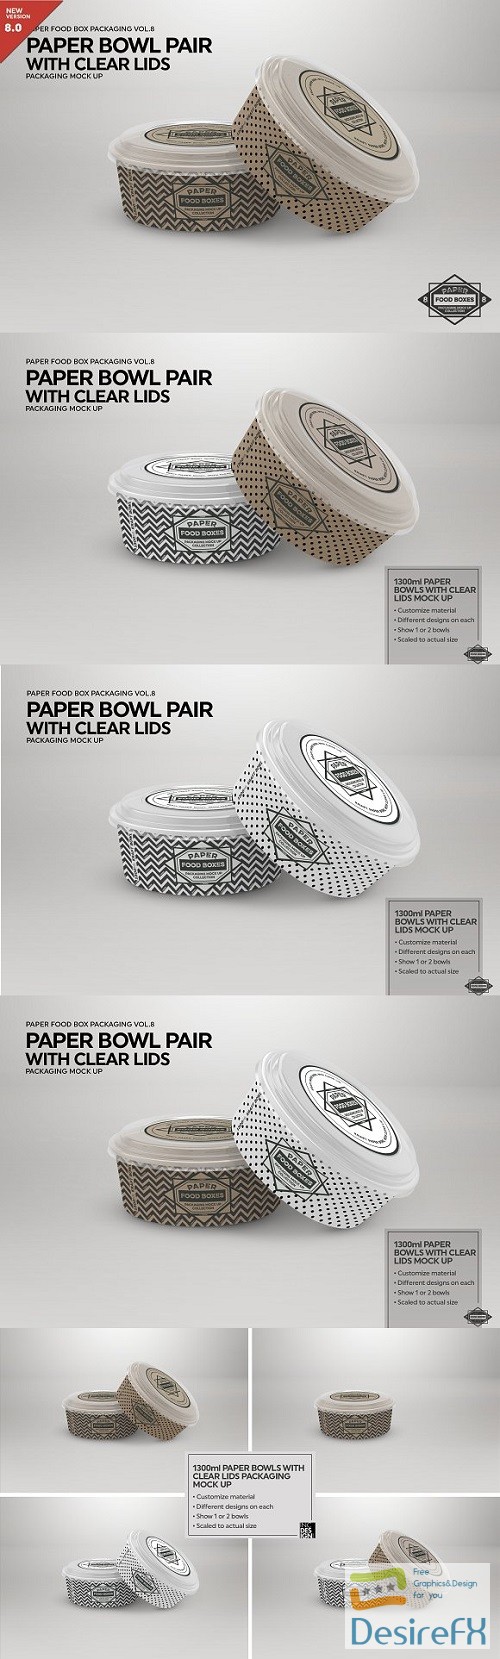 Download Desirefx.com | Download Paper Bowls with Clear Lids MockUp